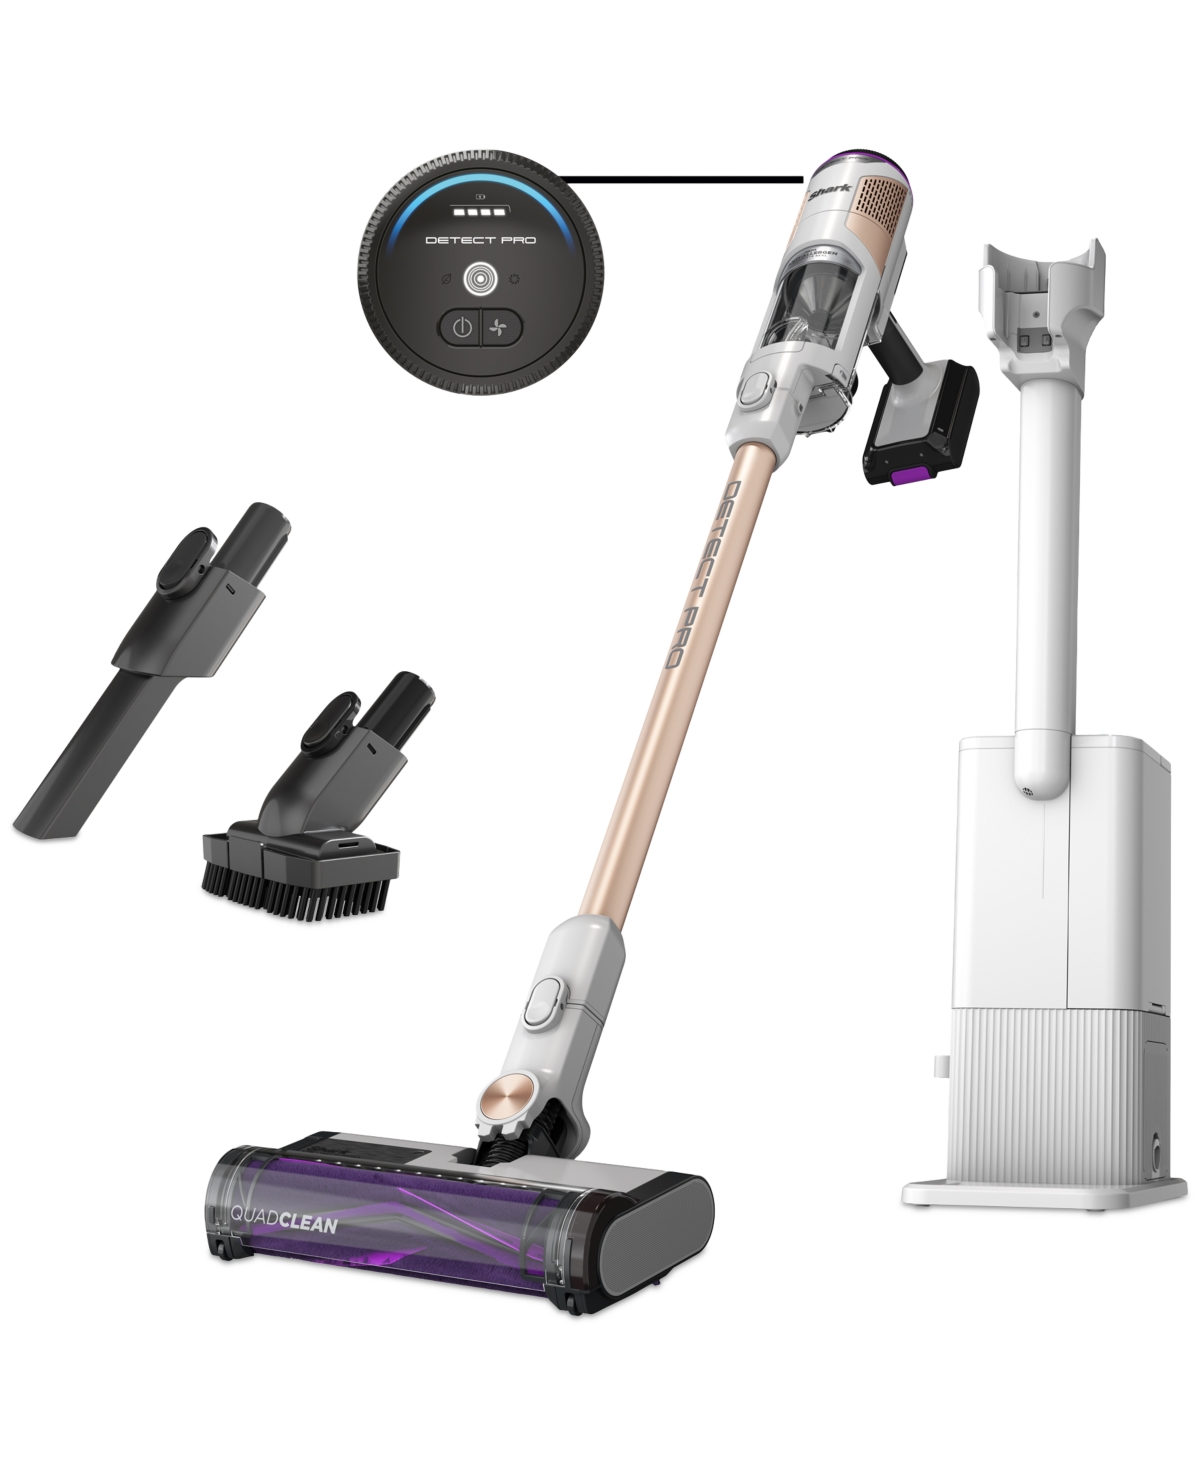 Cordless Detect Pro Auto-Empty System with QuadClean Multi-Surface Brushroll, Up to 60 Minutes Runtime, Hepa Filter- IW3511 - Rotator White, Clo